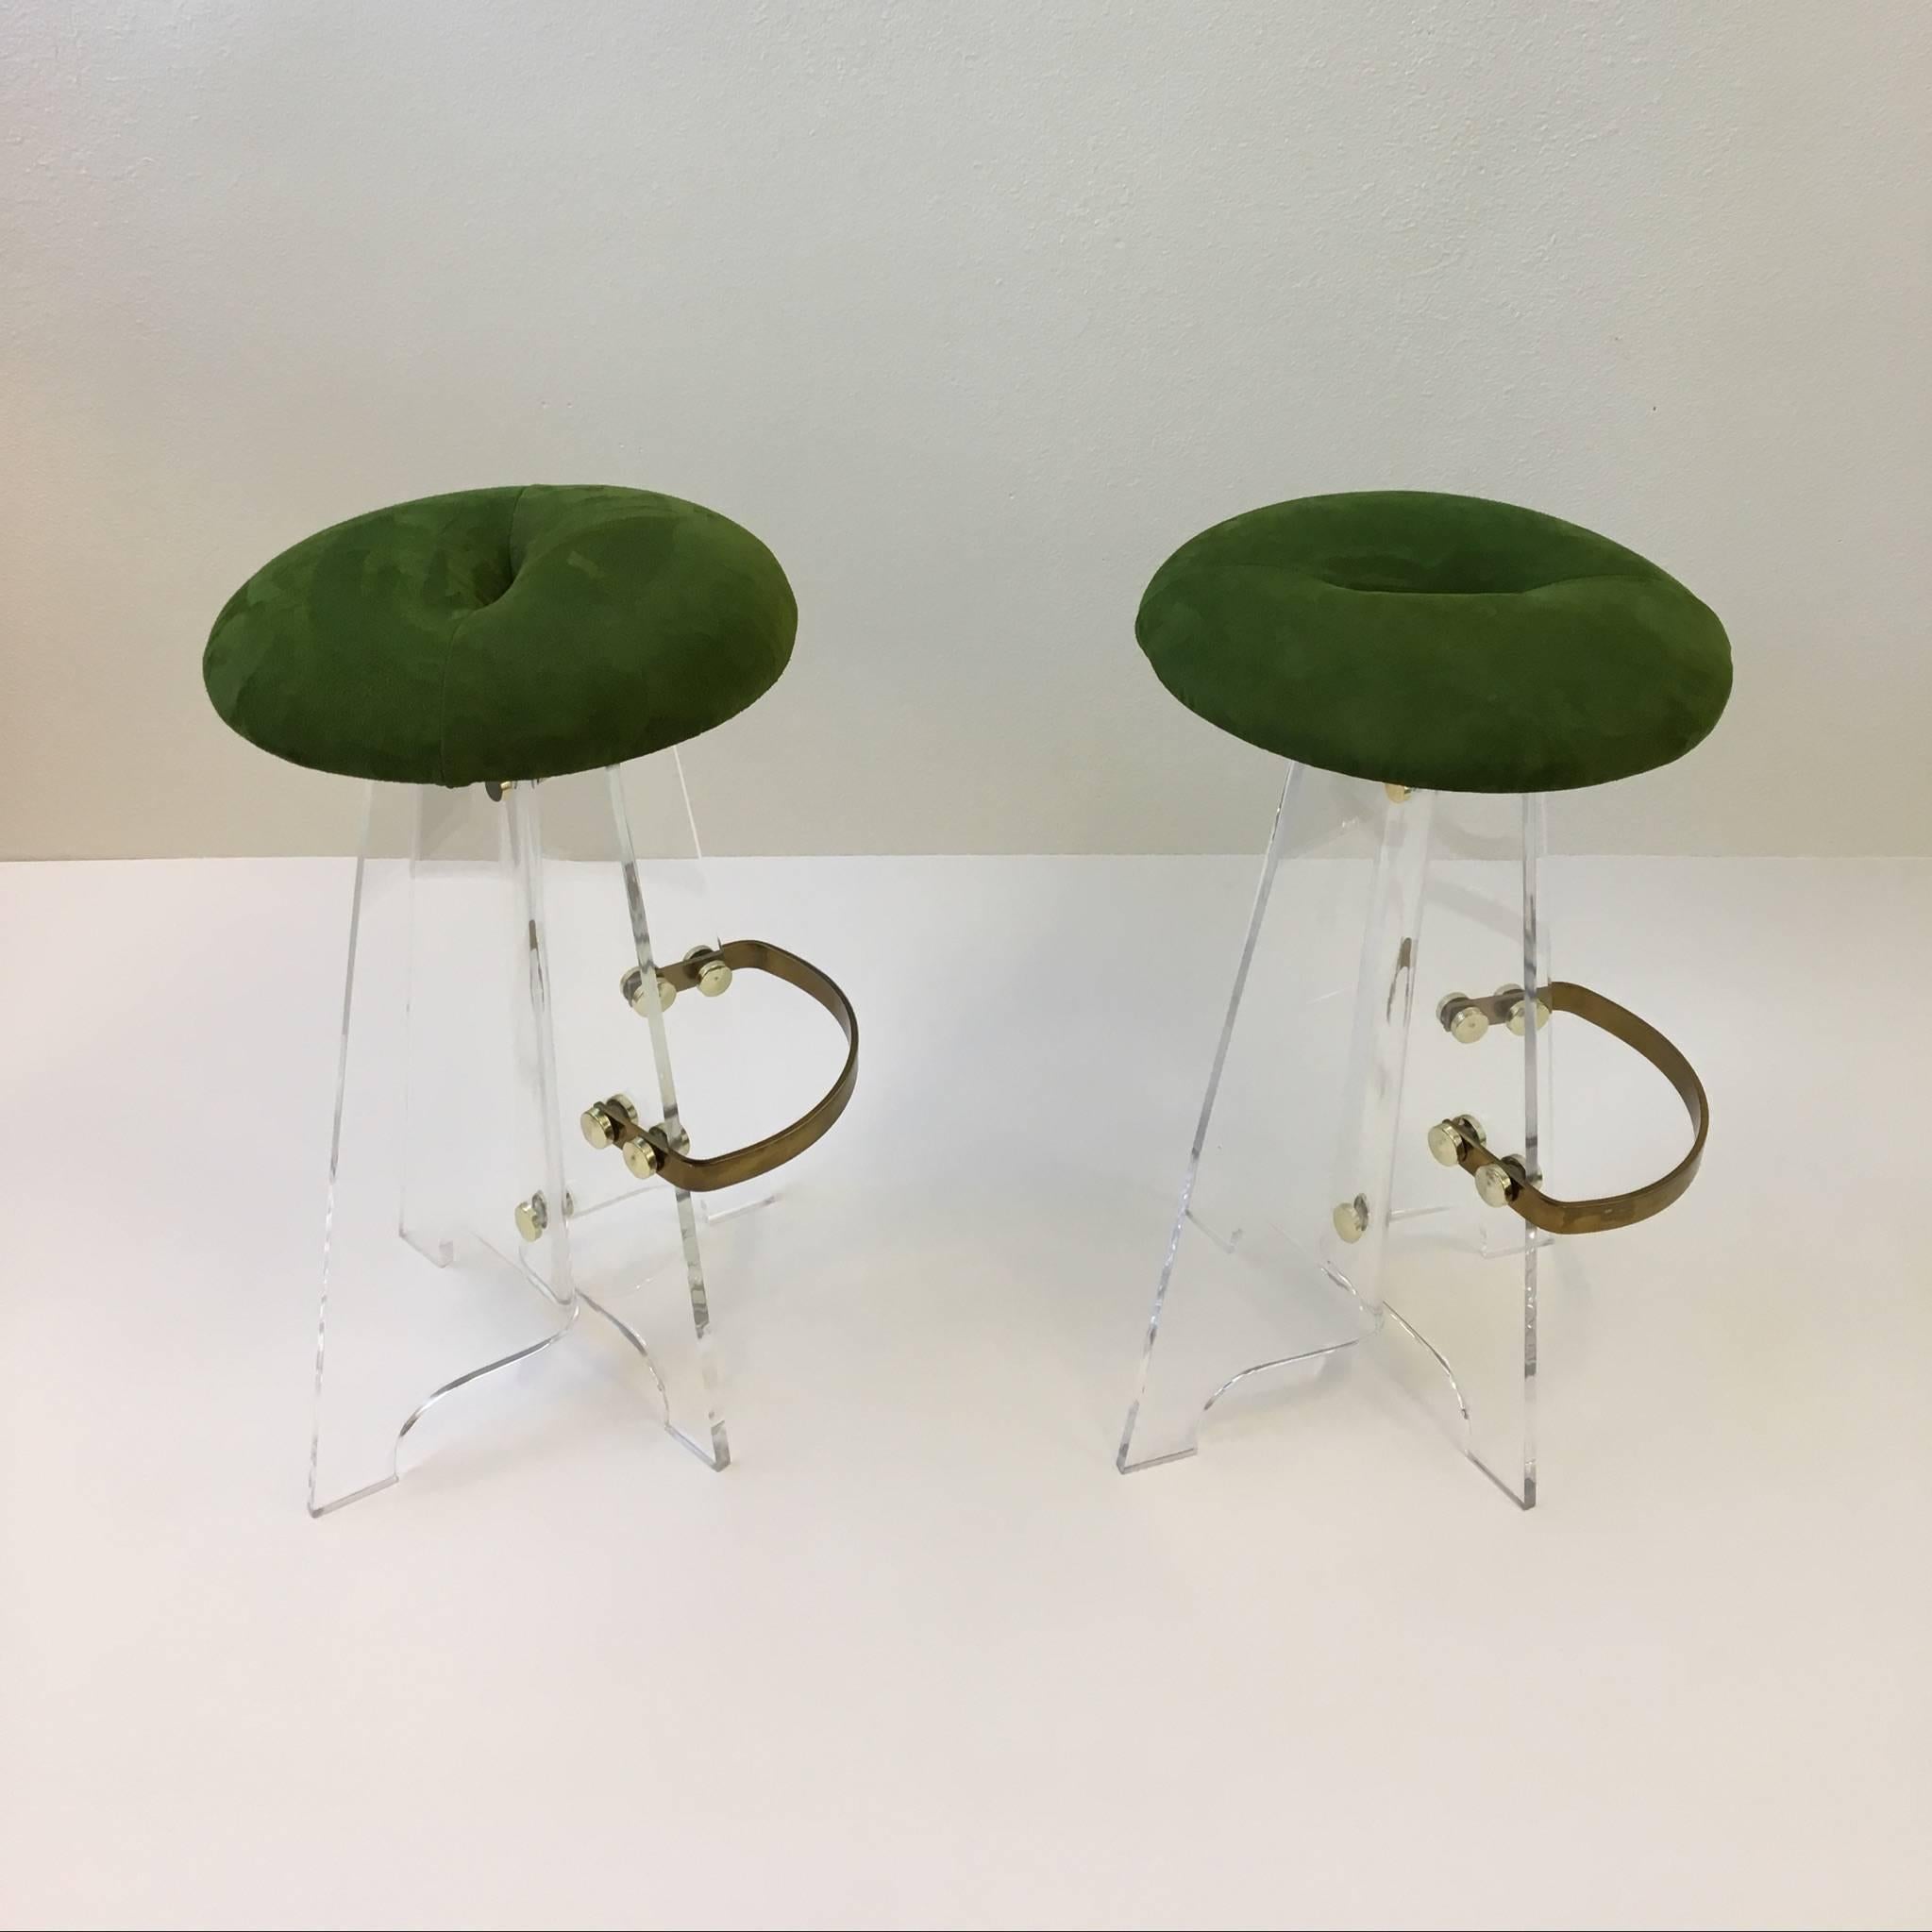 American Pair of Acrylic and Suede Leather Swivel Barstools